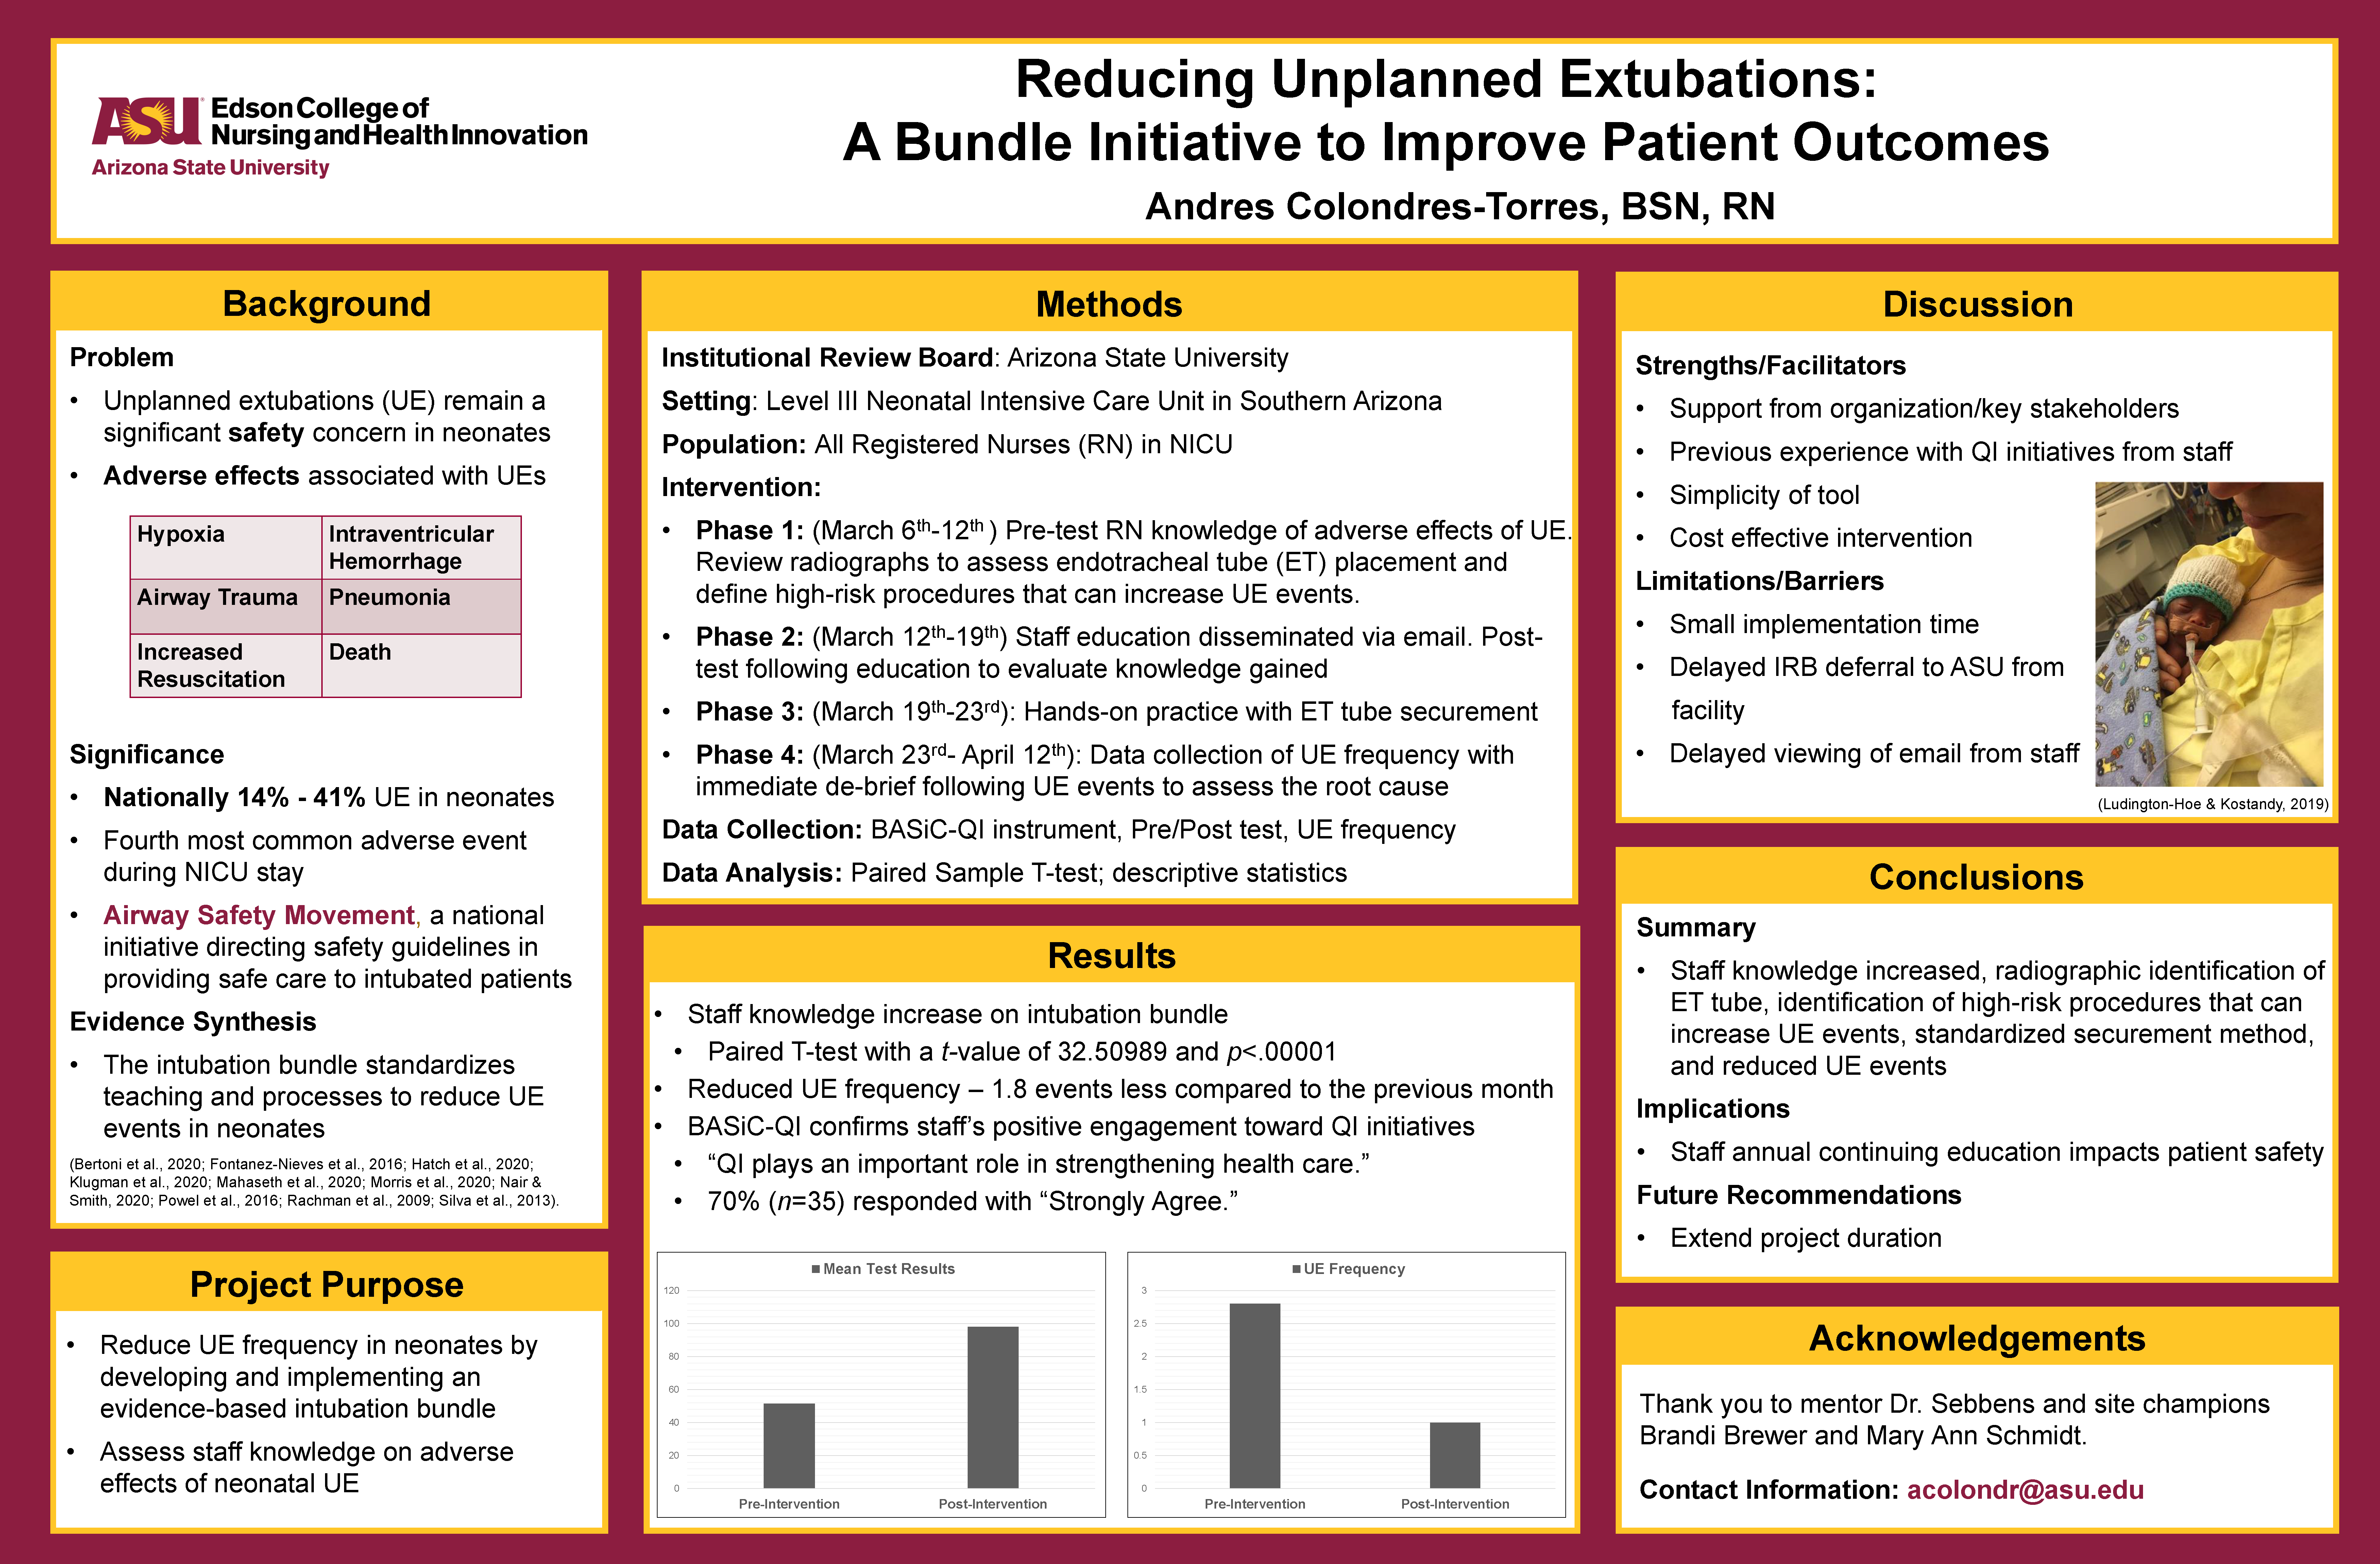 Reducing Unplanned Extubations: A Bundle Initiative to Improve Patient Outcomes poster